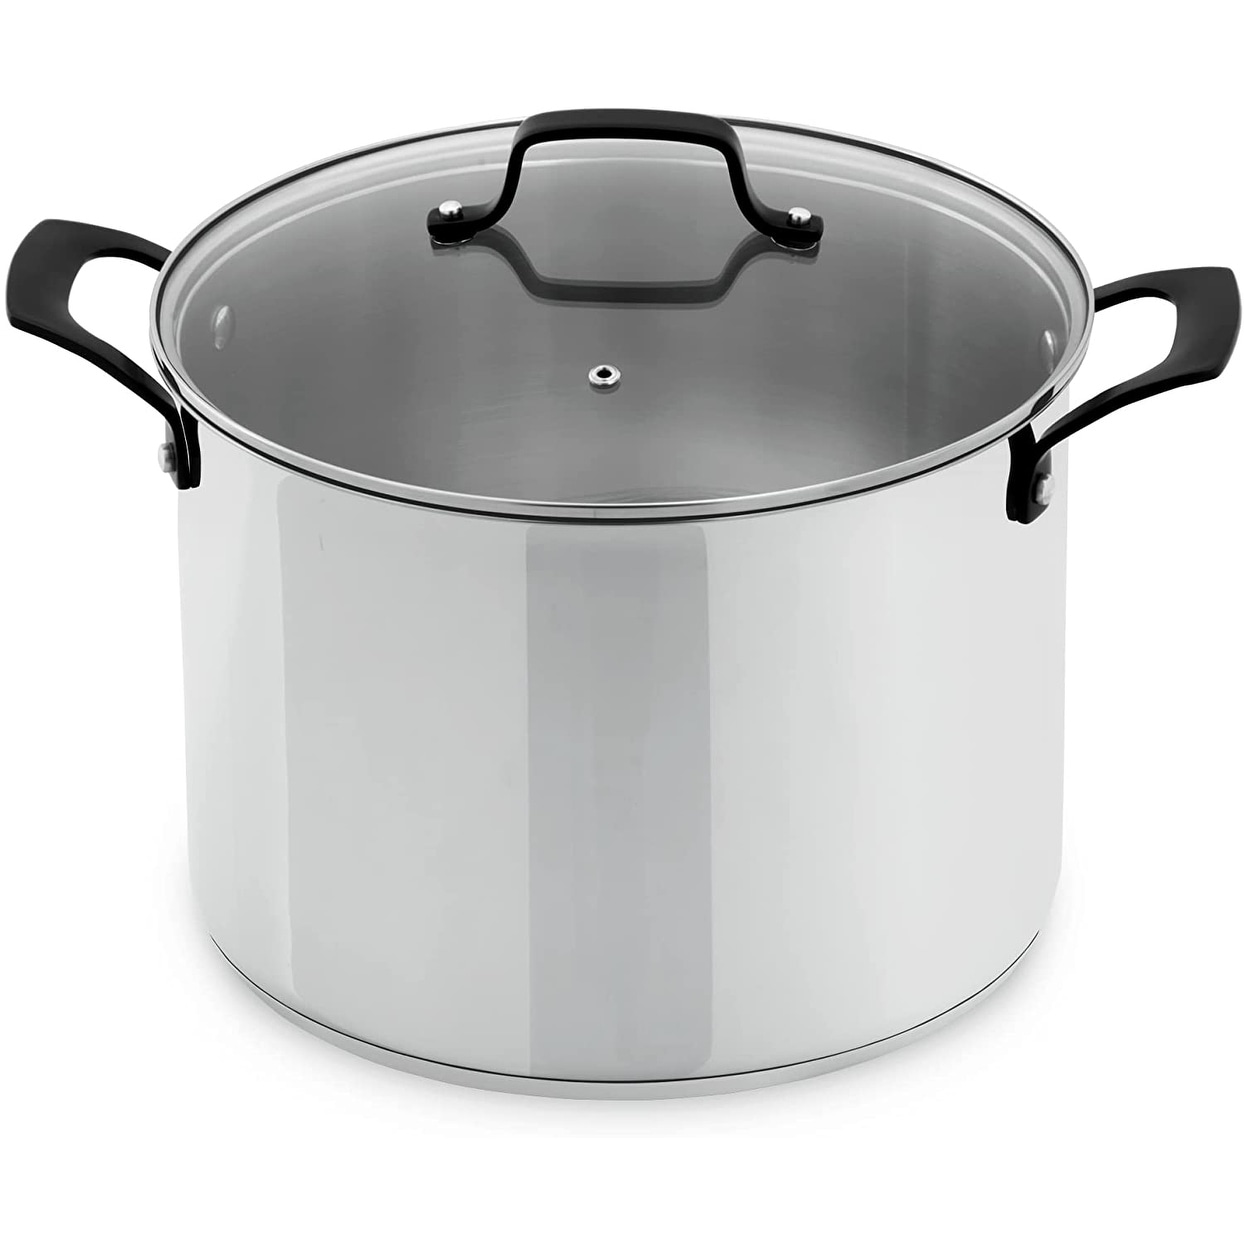 https://ak1.ostkcdn.com/images/products/is/images/direct/fc3c1d053419c1a362b8e4ac8c19820aee7ff9e9/GrandTies-Tri-Ply-12-QT-Stainless-Steel-Stock-Pot-with-Lid-Induction-Cookware.jpg